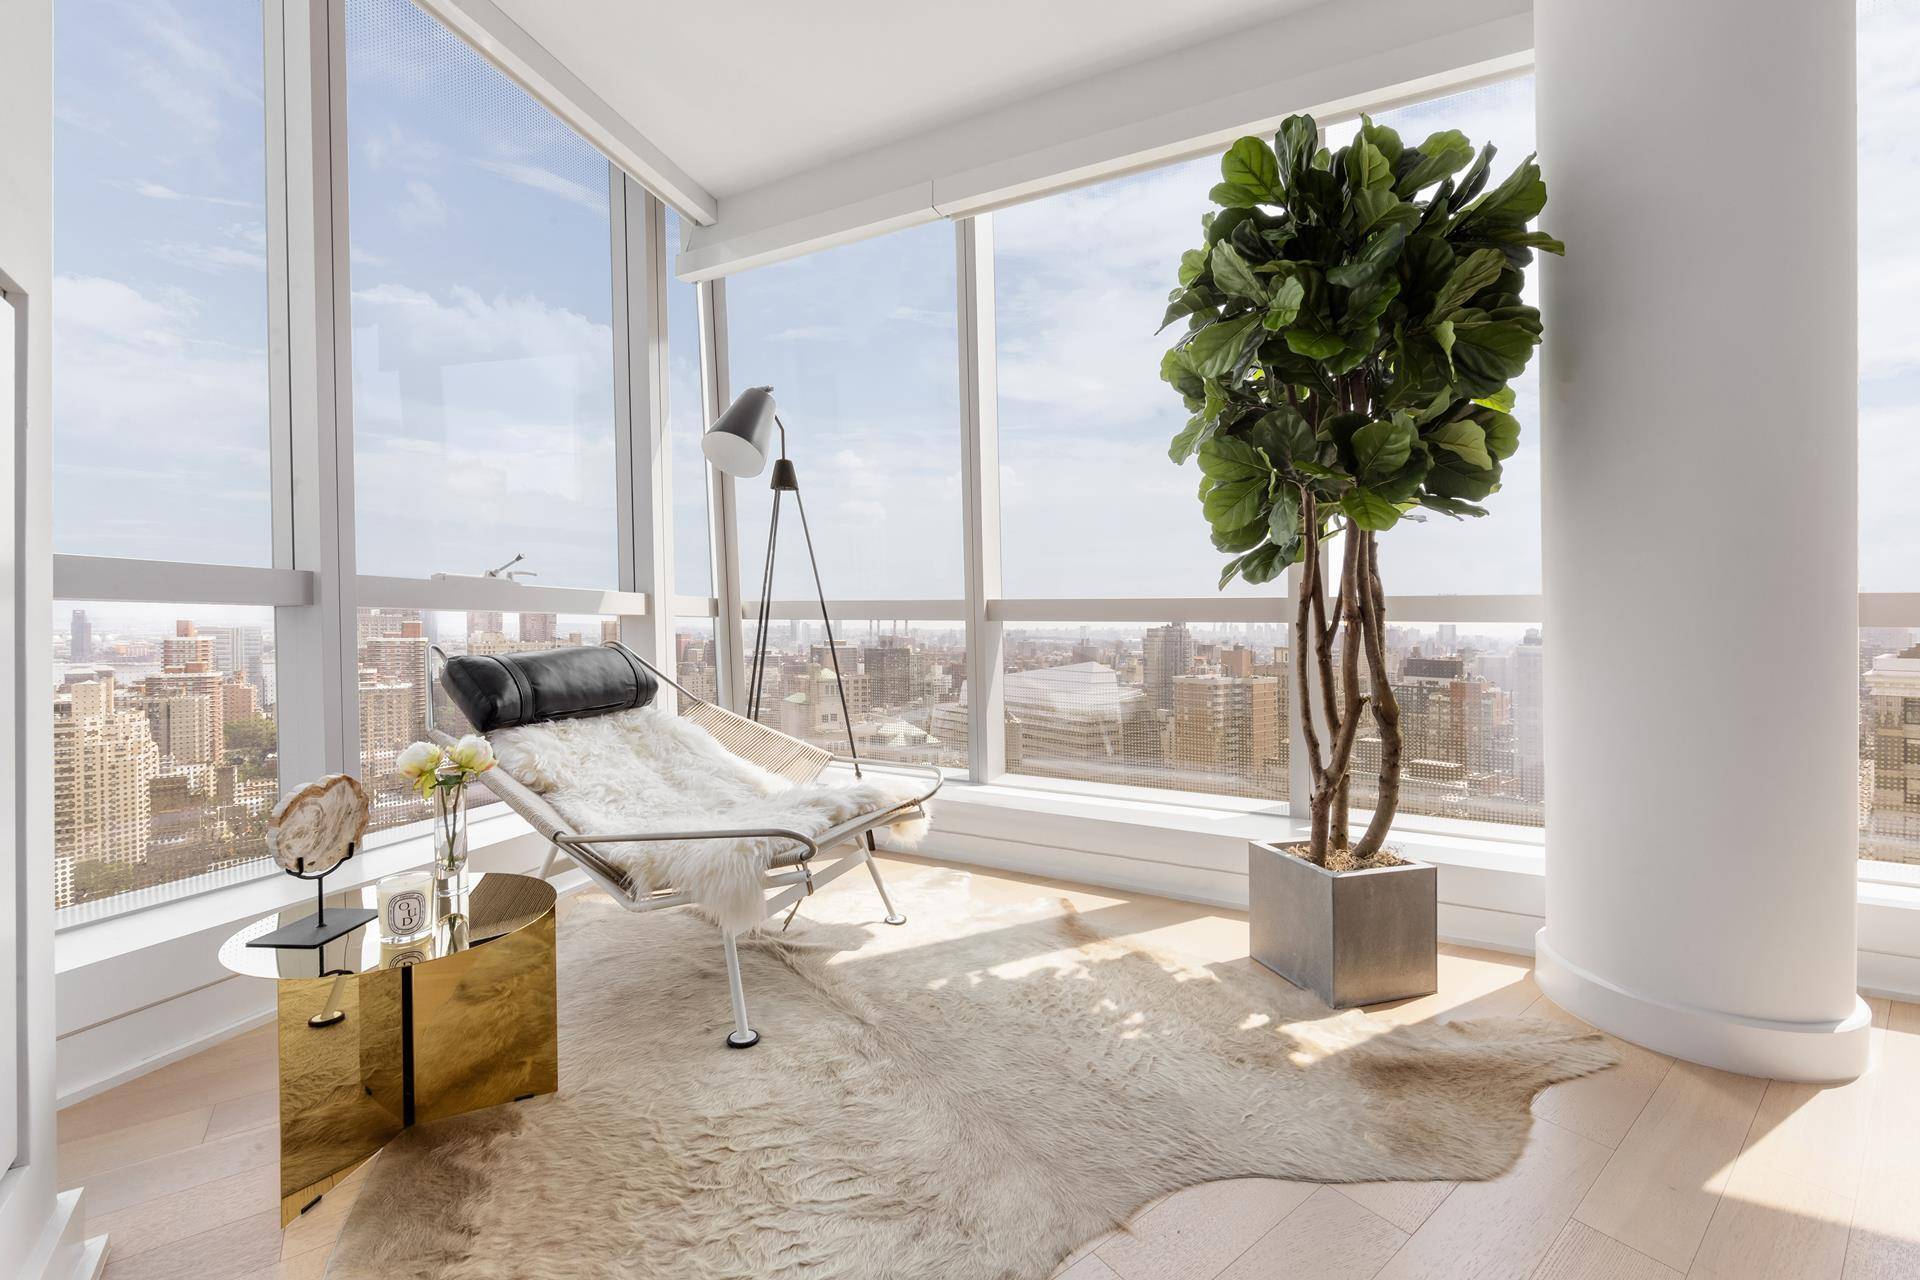 Incomparable views and luxury is yours, at the lowest price per sq ft for a 3 bedroom condo above the 20th floor in Nomad !